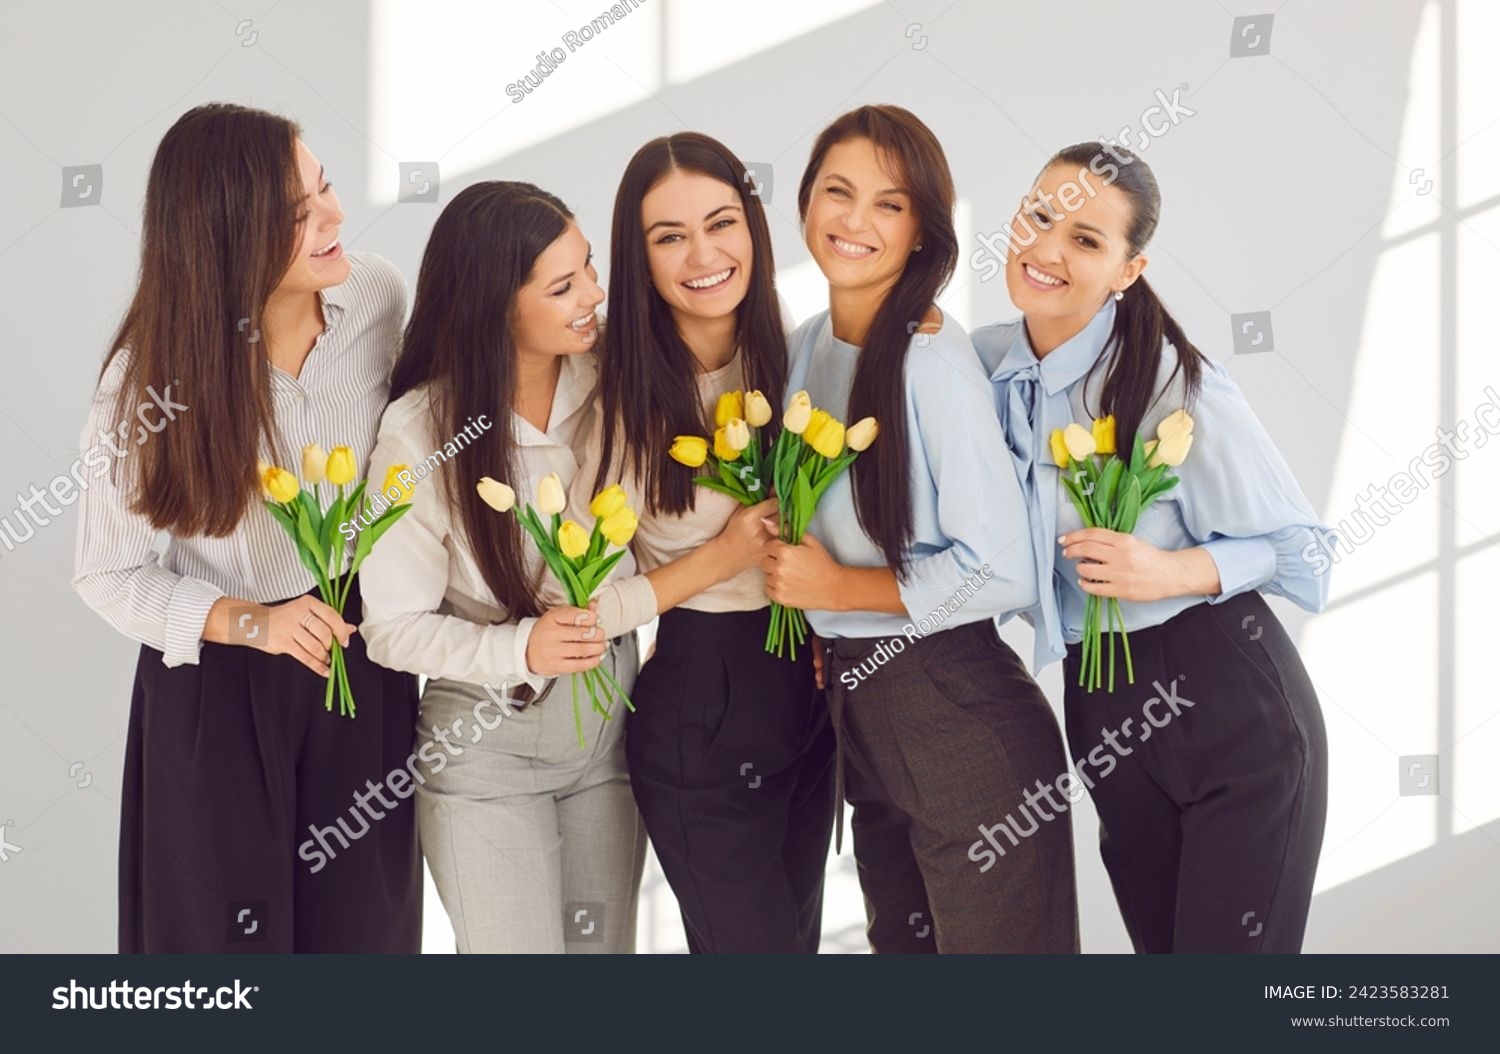 Group of happy business women in office celebrating International Women's Day together. Portrait of stylish and beautiful businesswomen with yellow tulips hugging and smiling in front of camera. #2423583281